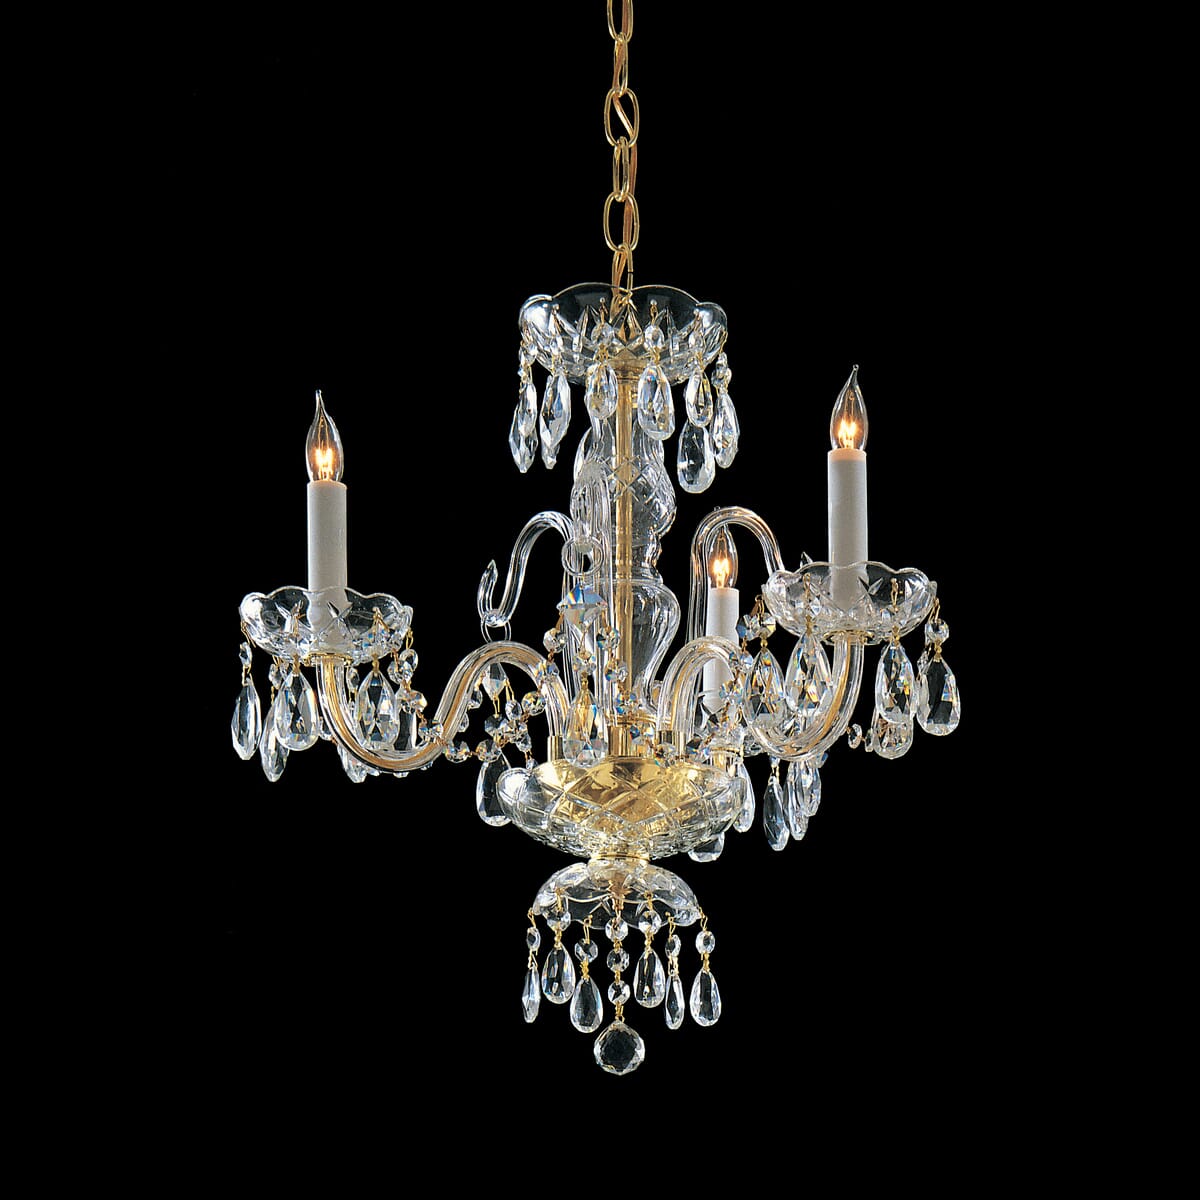 Traditional Crystal 3-Light 18"" Mini Chandelier in Polished Brass with Clear Spectra Crystals -  Crystorama, 5044-PB-CL-SAQ